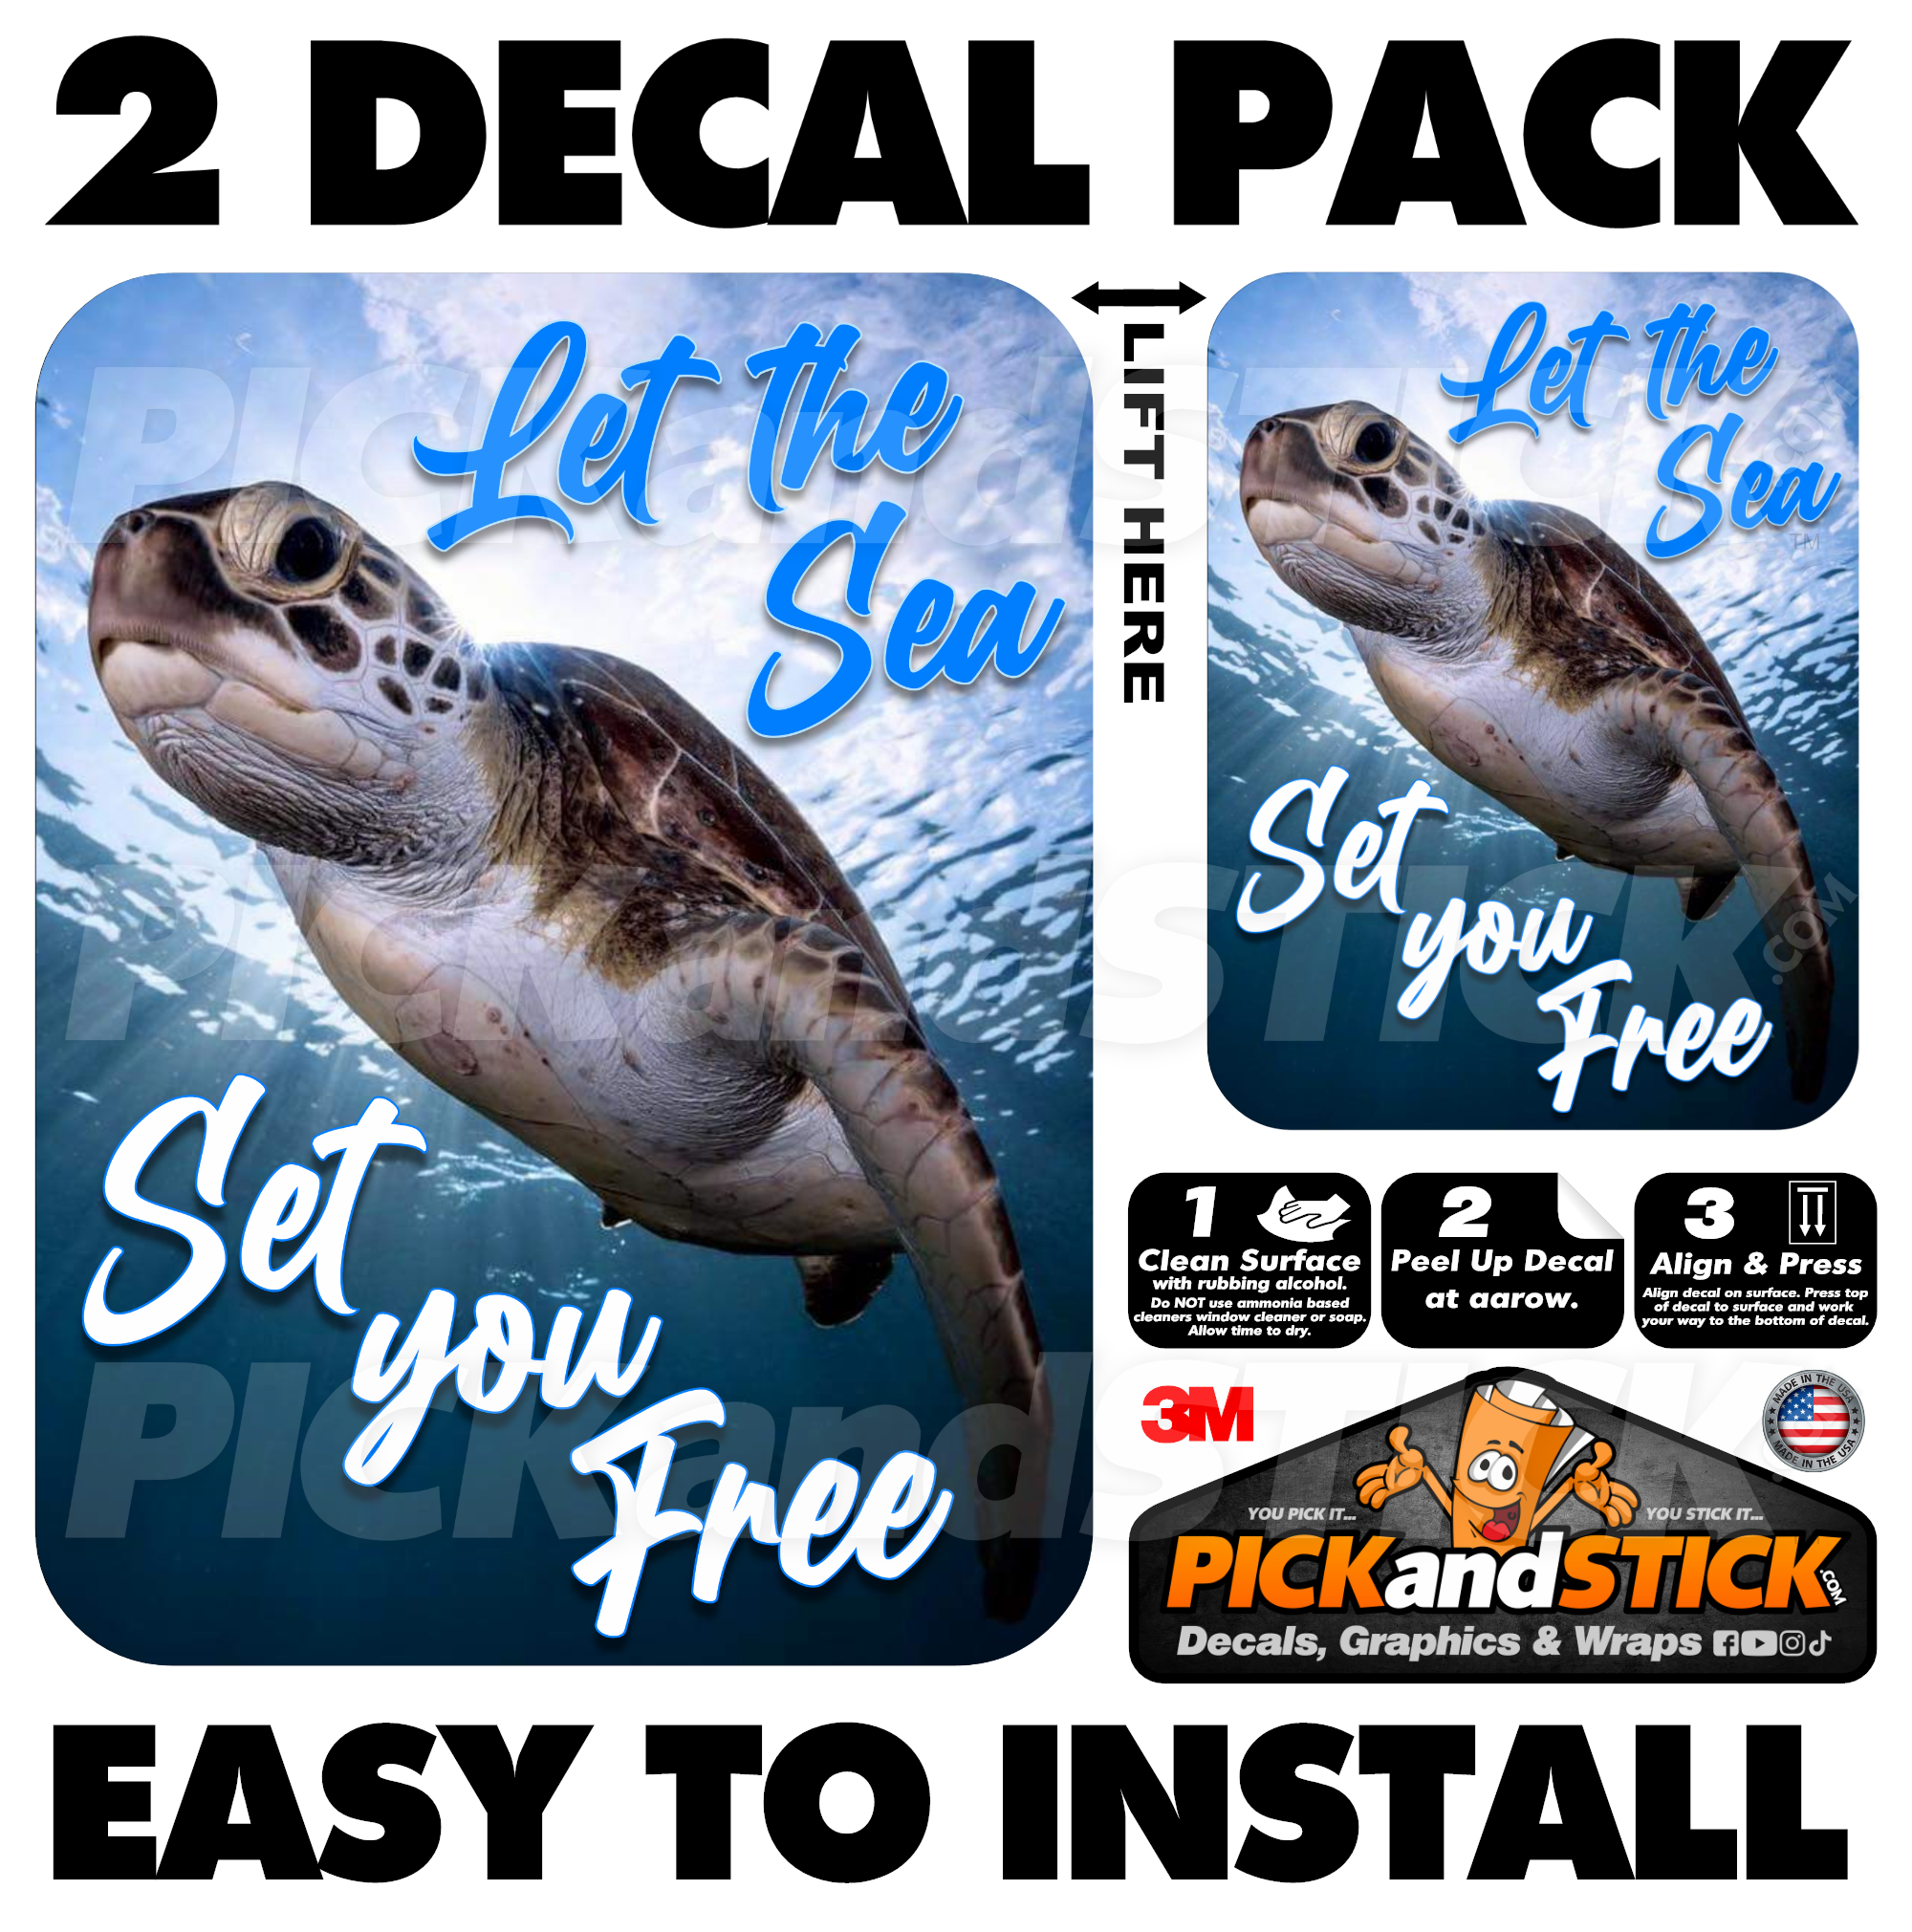 Sea Turtle - Let The Sea, Set You Free - 2 Decal Pack